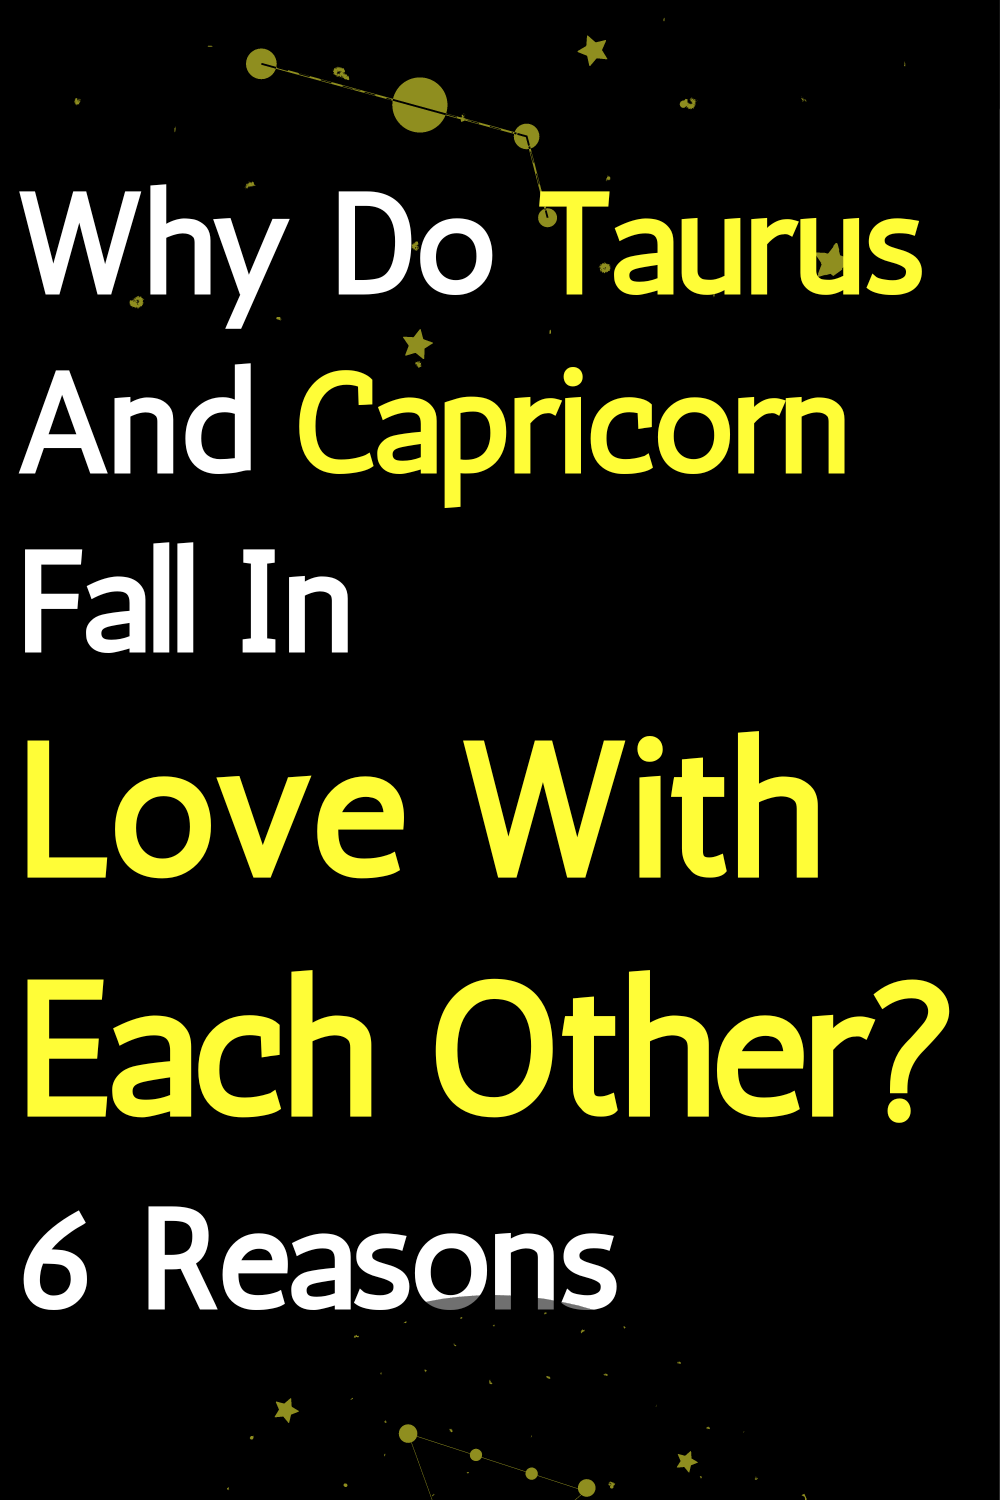 Why Do Taurus And Capricorn Fall In Love With Each Other? 6 Reasons